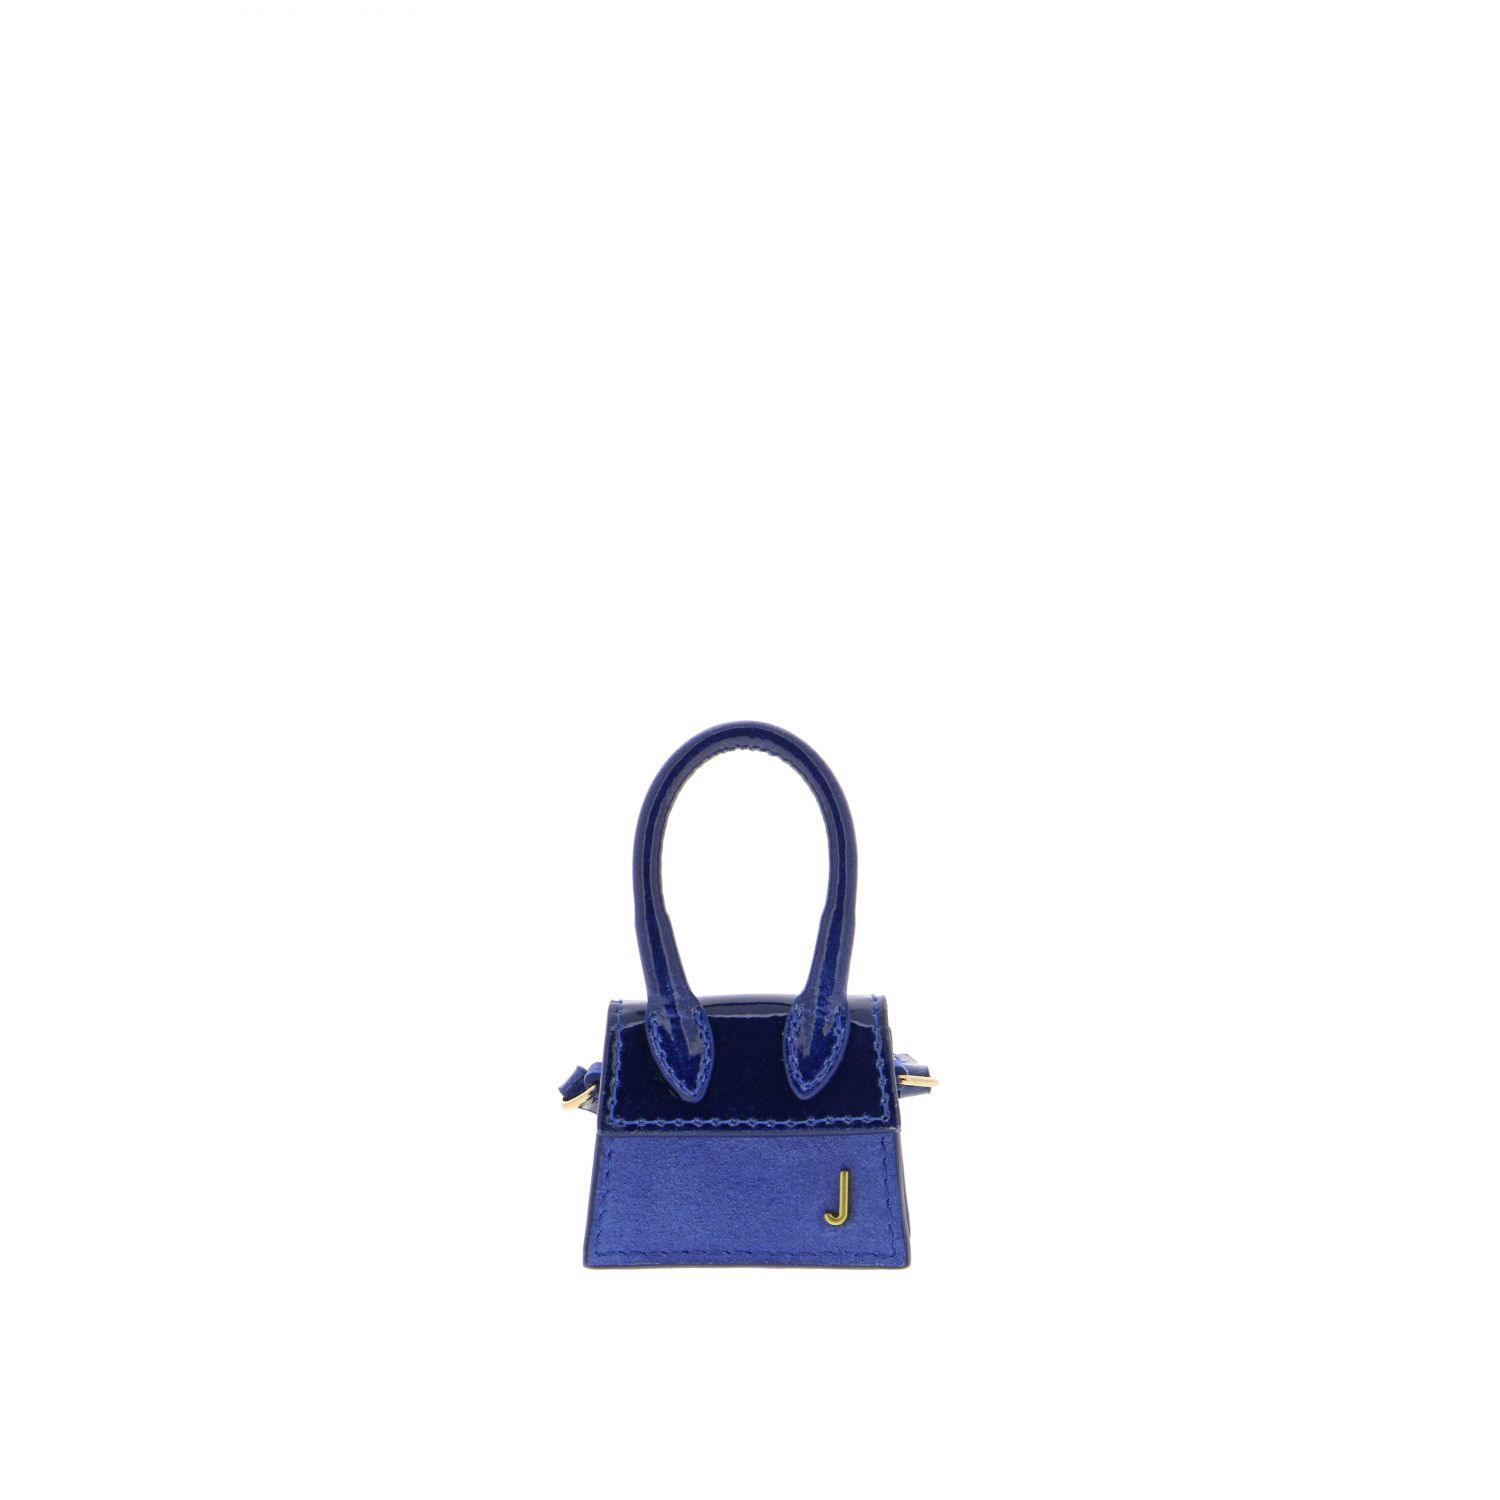 Jacquemus Le Petit Chiquito Patent-Leather And Suede Bag